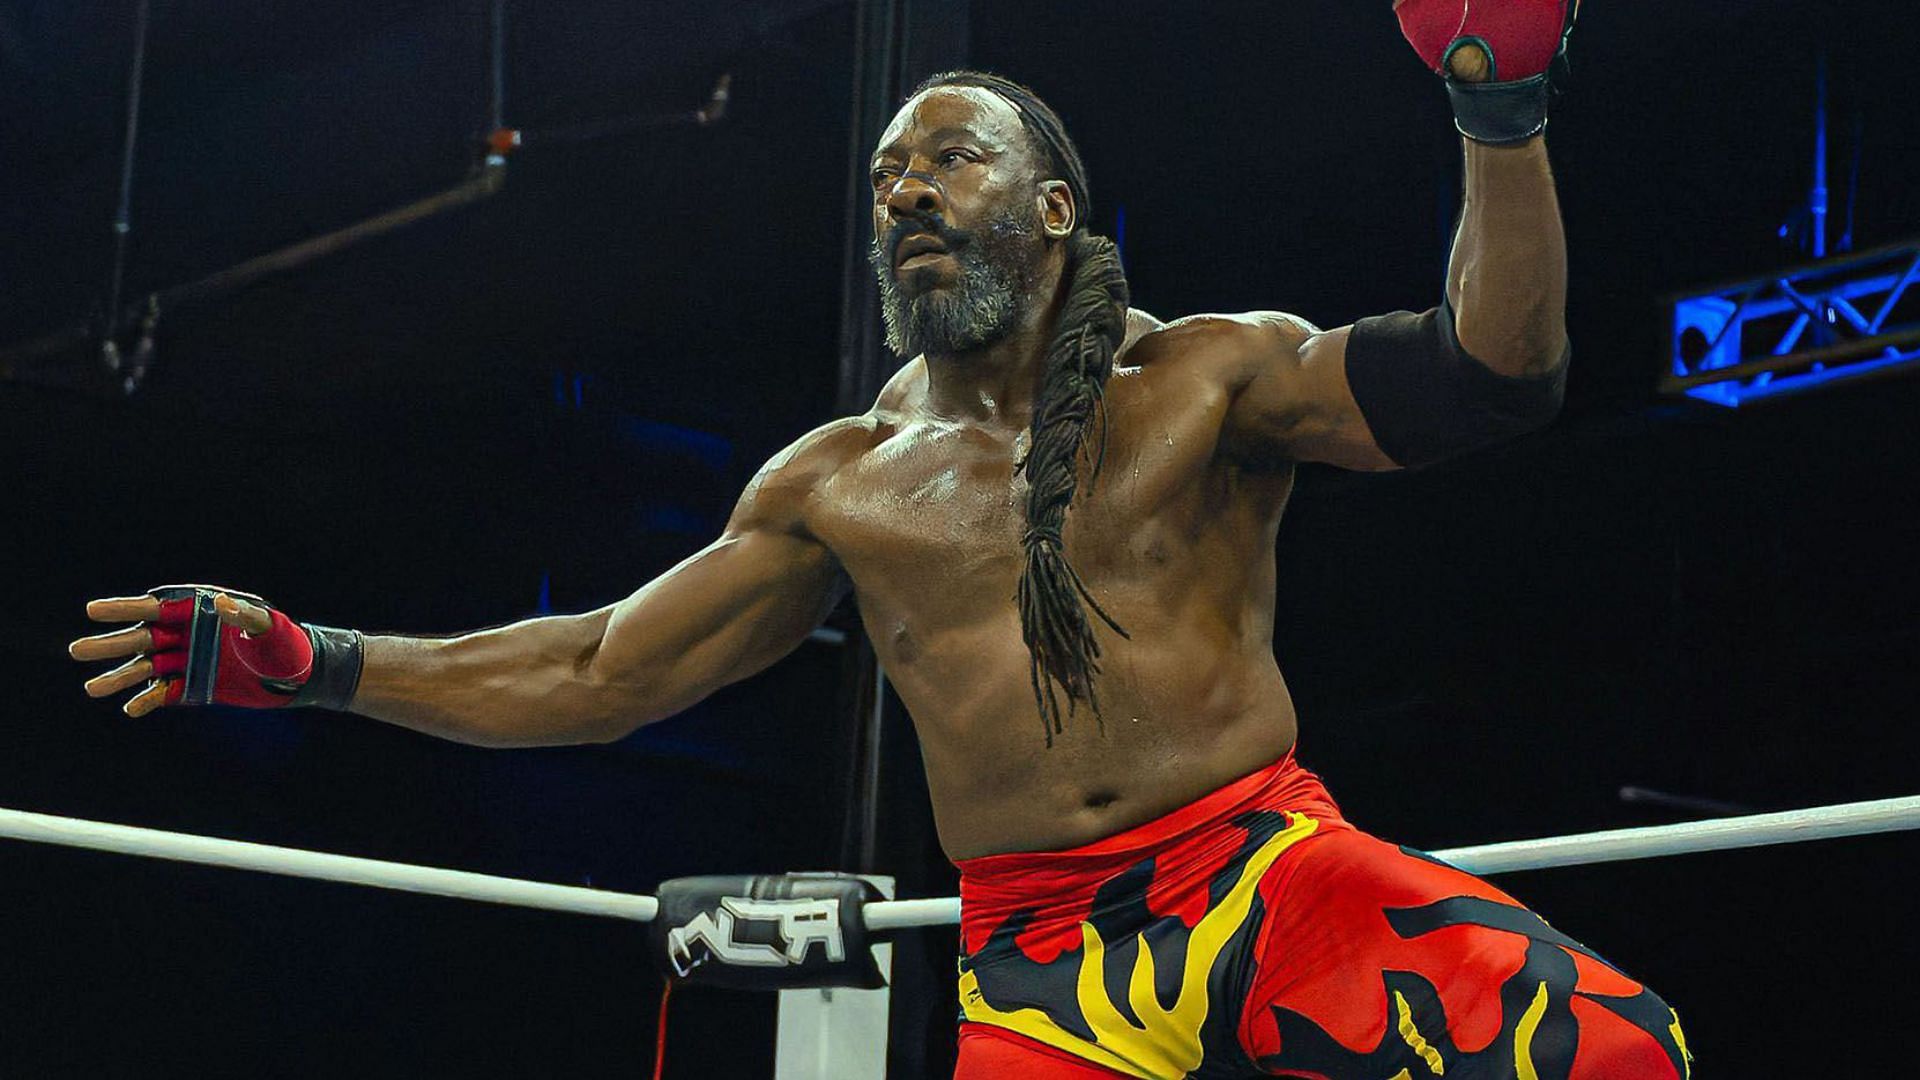 Booker T performing at Reality of Wrestling